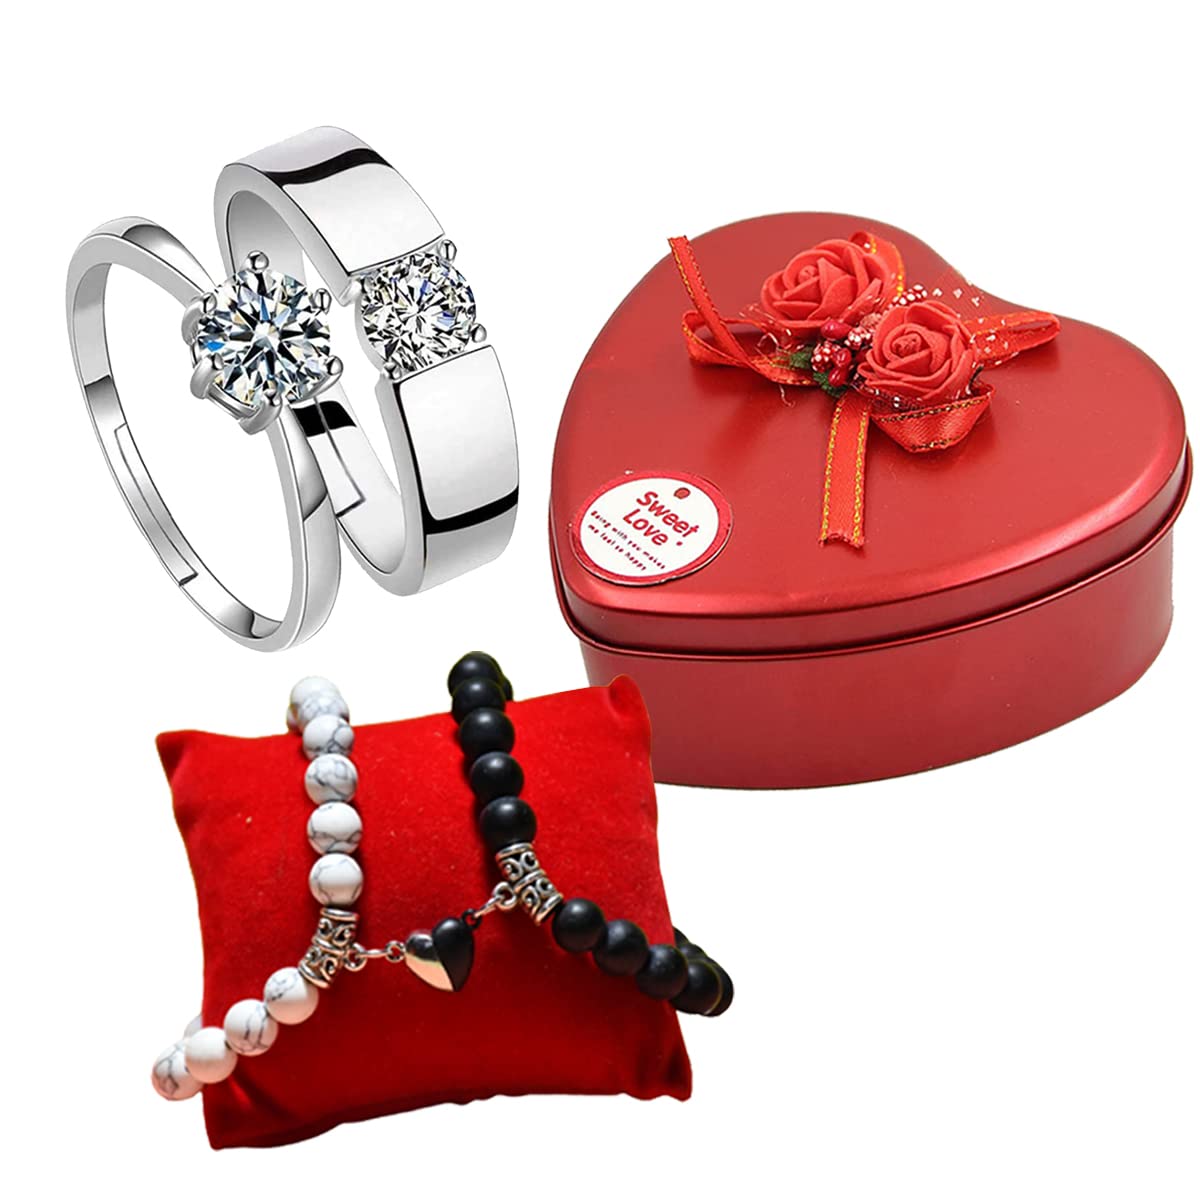 Best Gift for Couples, Surprise Gifts